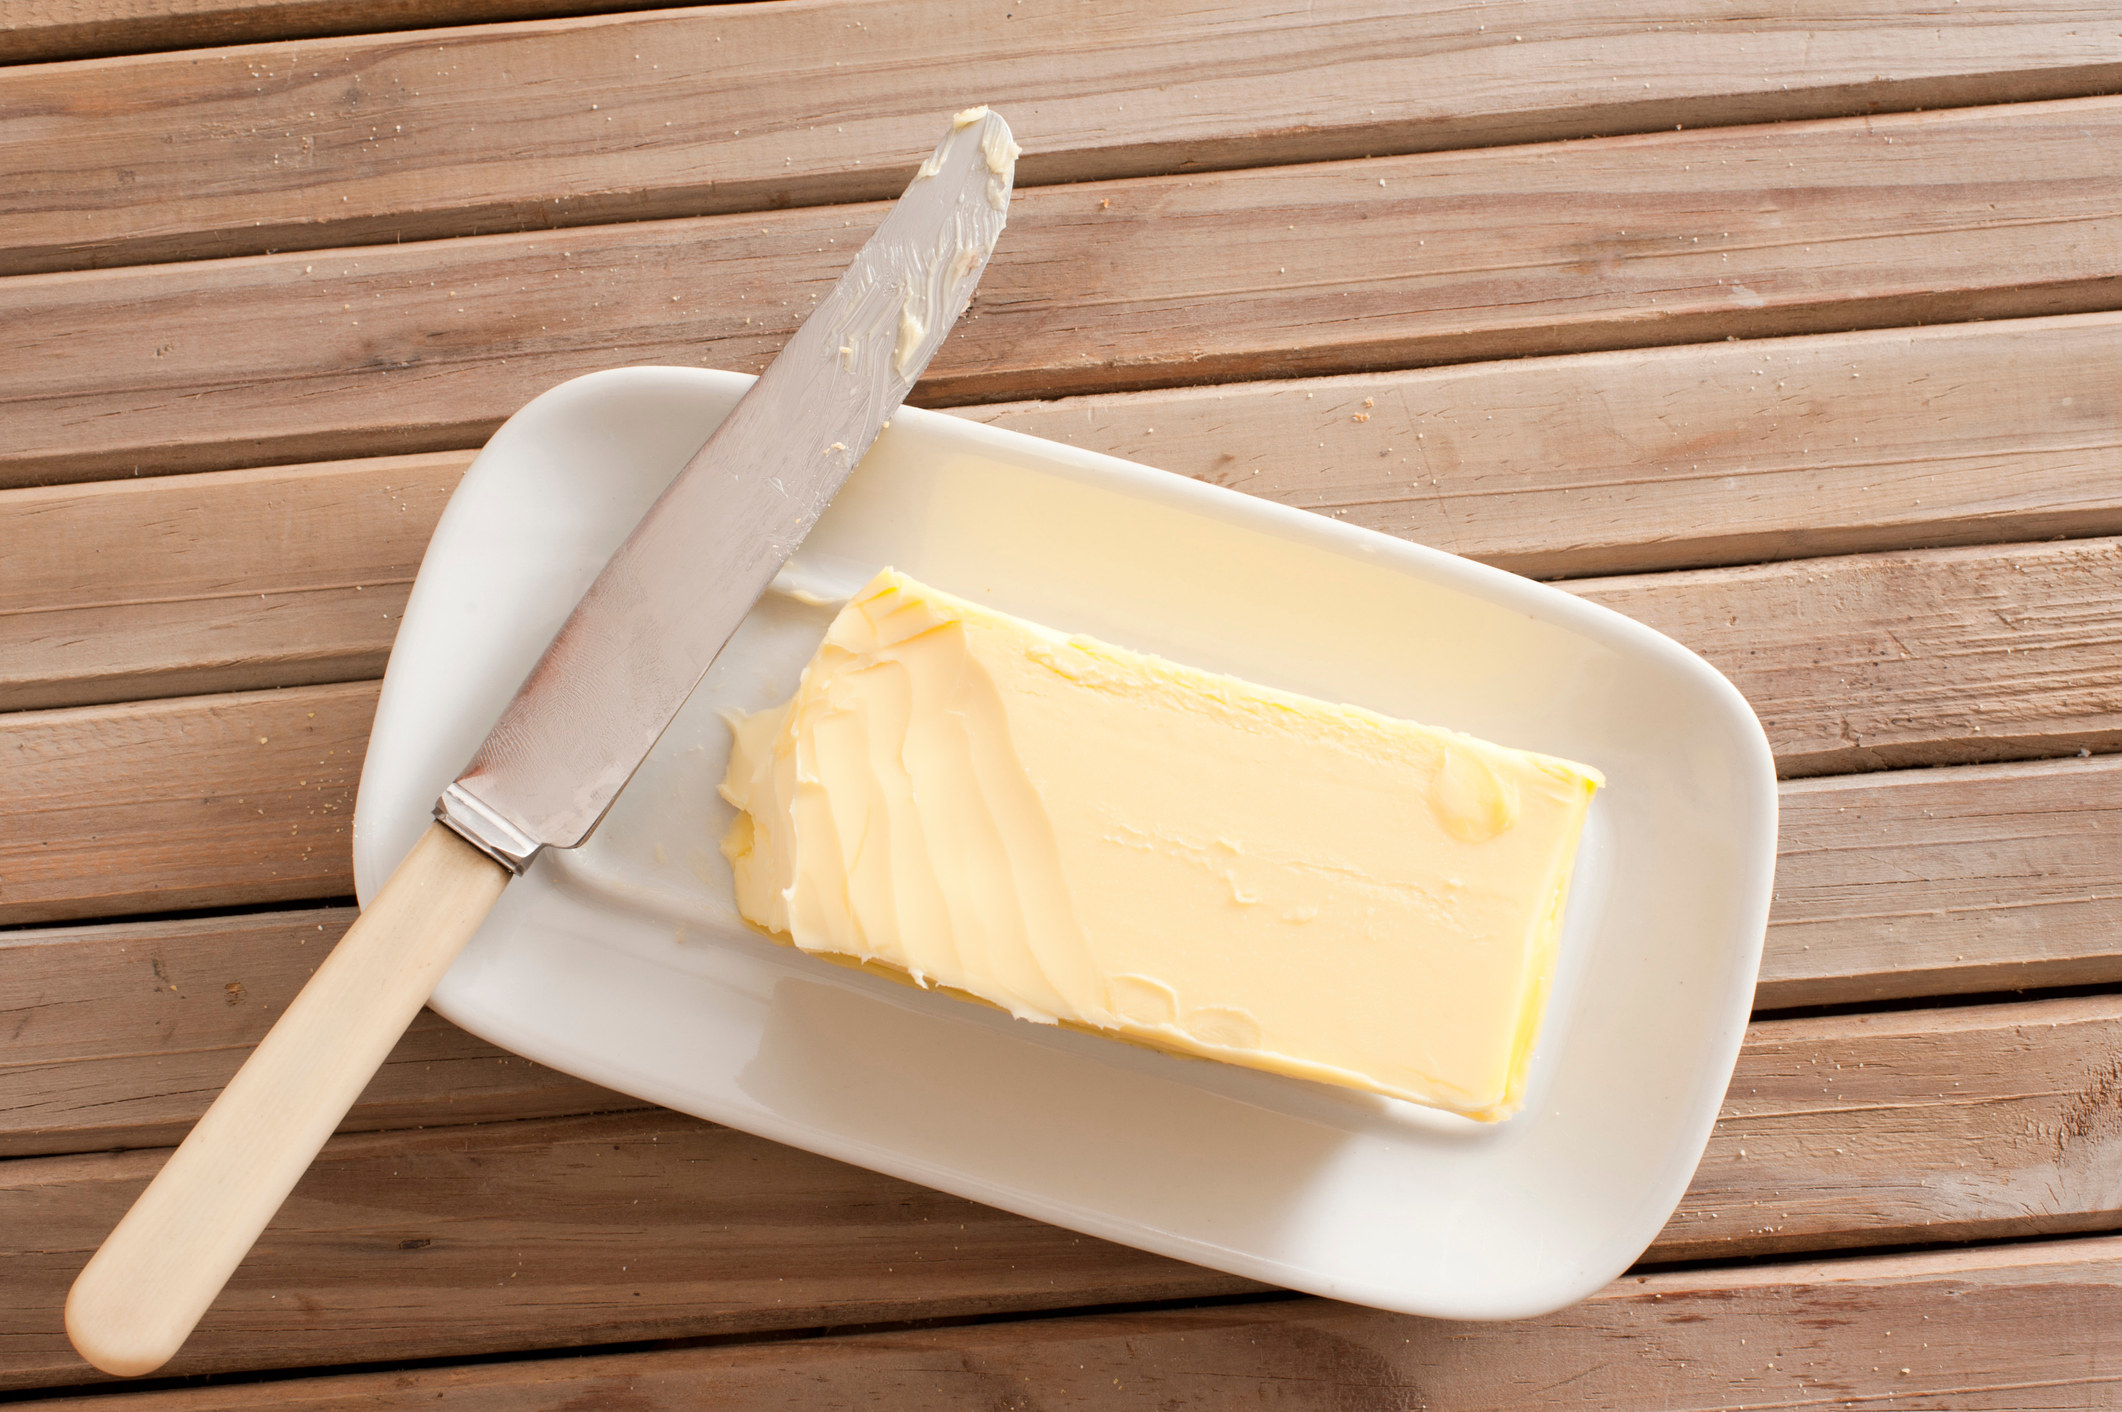 Butter sits on dish with knife